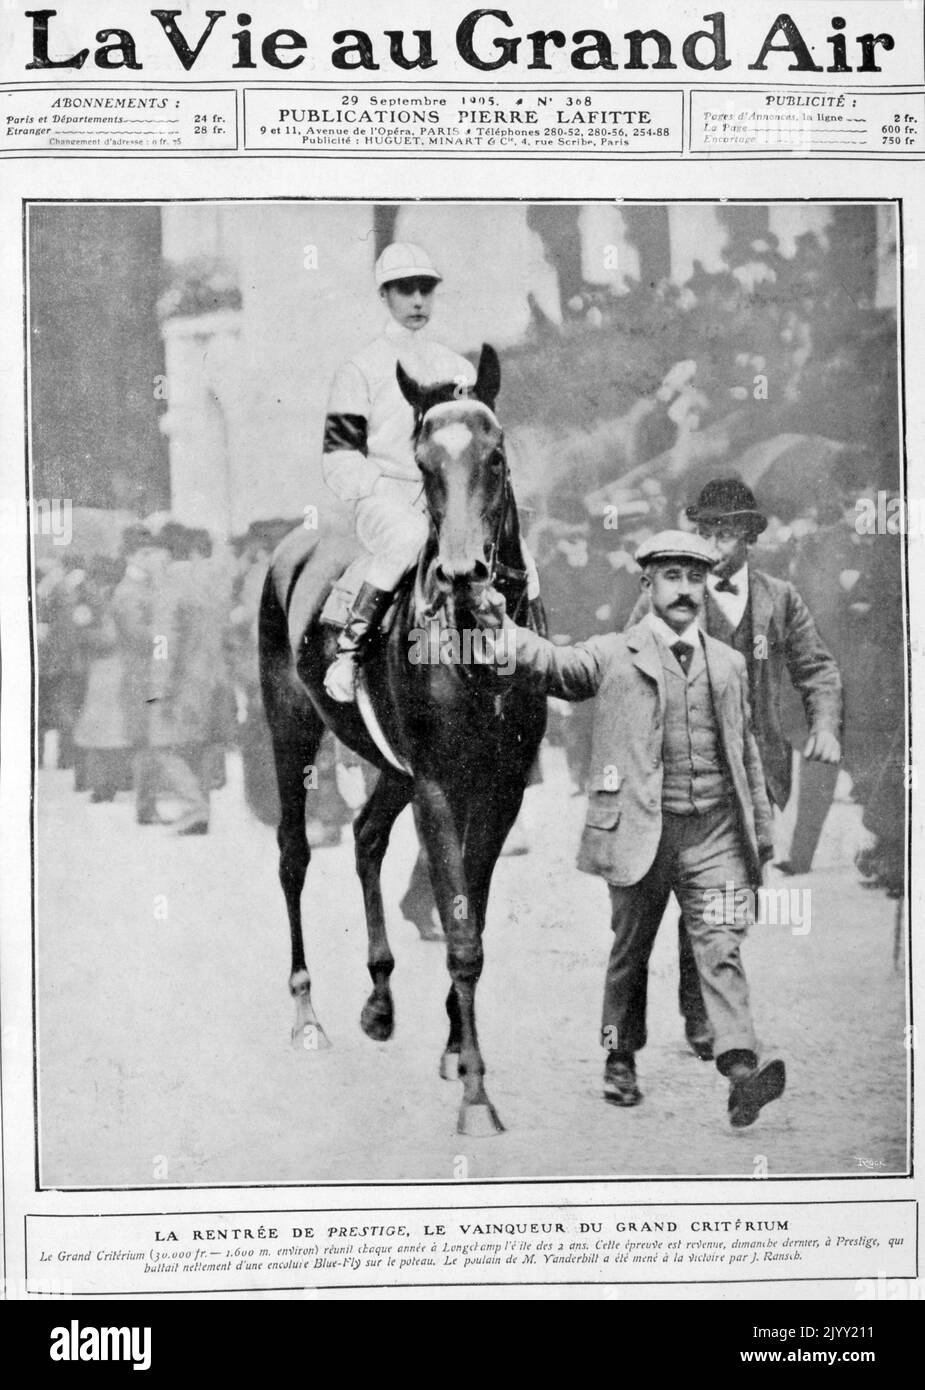 Prestige (1903 - 1923), an undefeated French Thoroughbred racehorse and sire wins the 1905 Grand Criterium Race. Prestige was the dominant two-year-old in France in 1905, winning all seven of his races including the Omnium de Deux Ans, Prix de Deux Ans, Criterium de Maisons-Laffitte, Grand Criterium and Prix de la Foret. Stock Photo